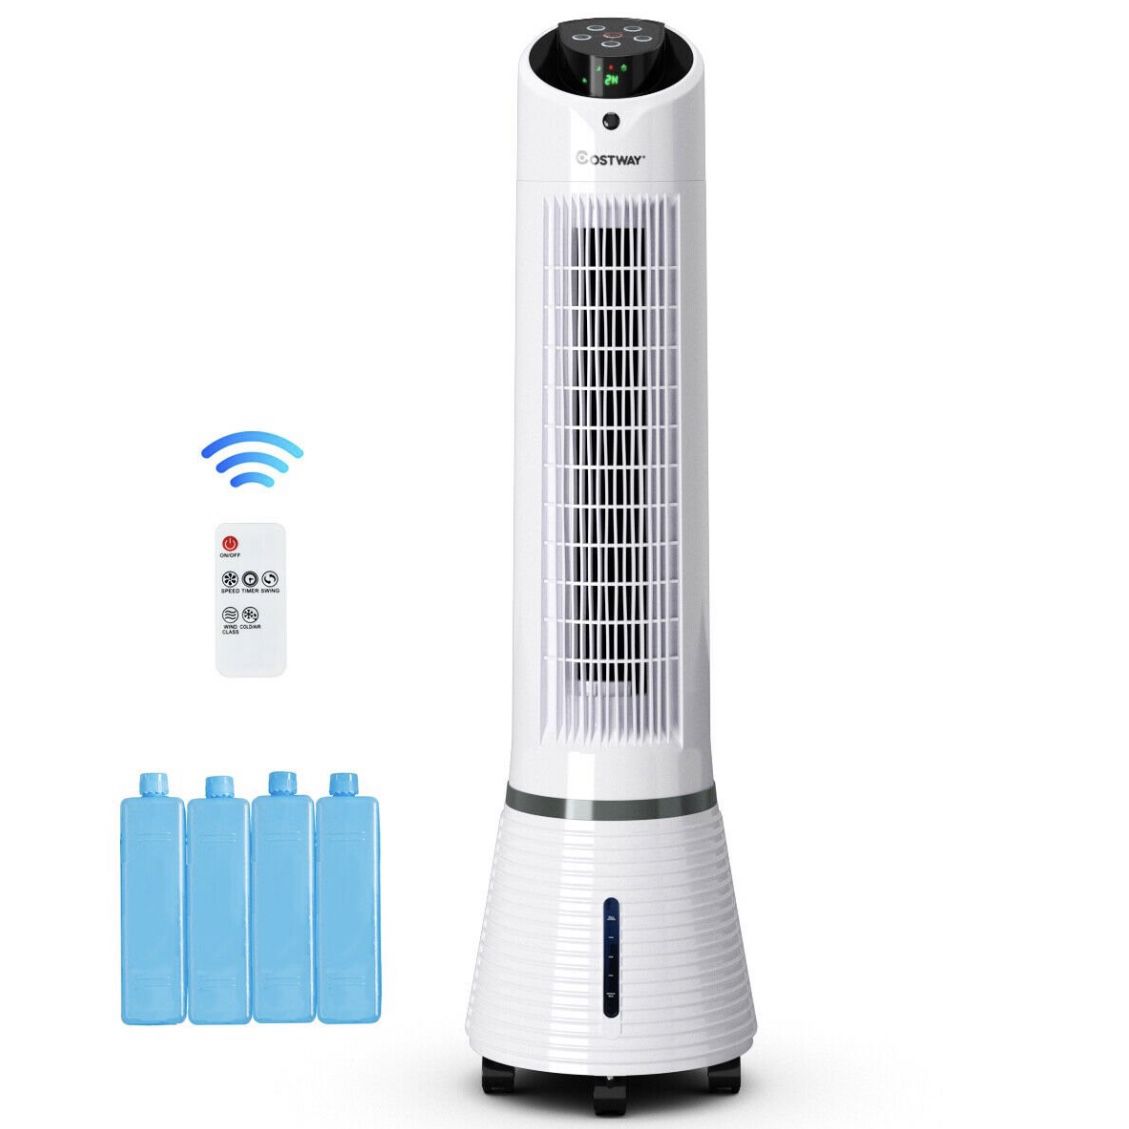 - Costway Portable Air Conditioner Cooler Fan Filter Humidify Tower Fan W/Remote Control